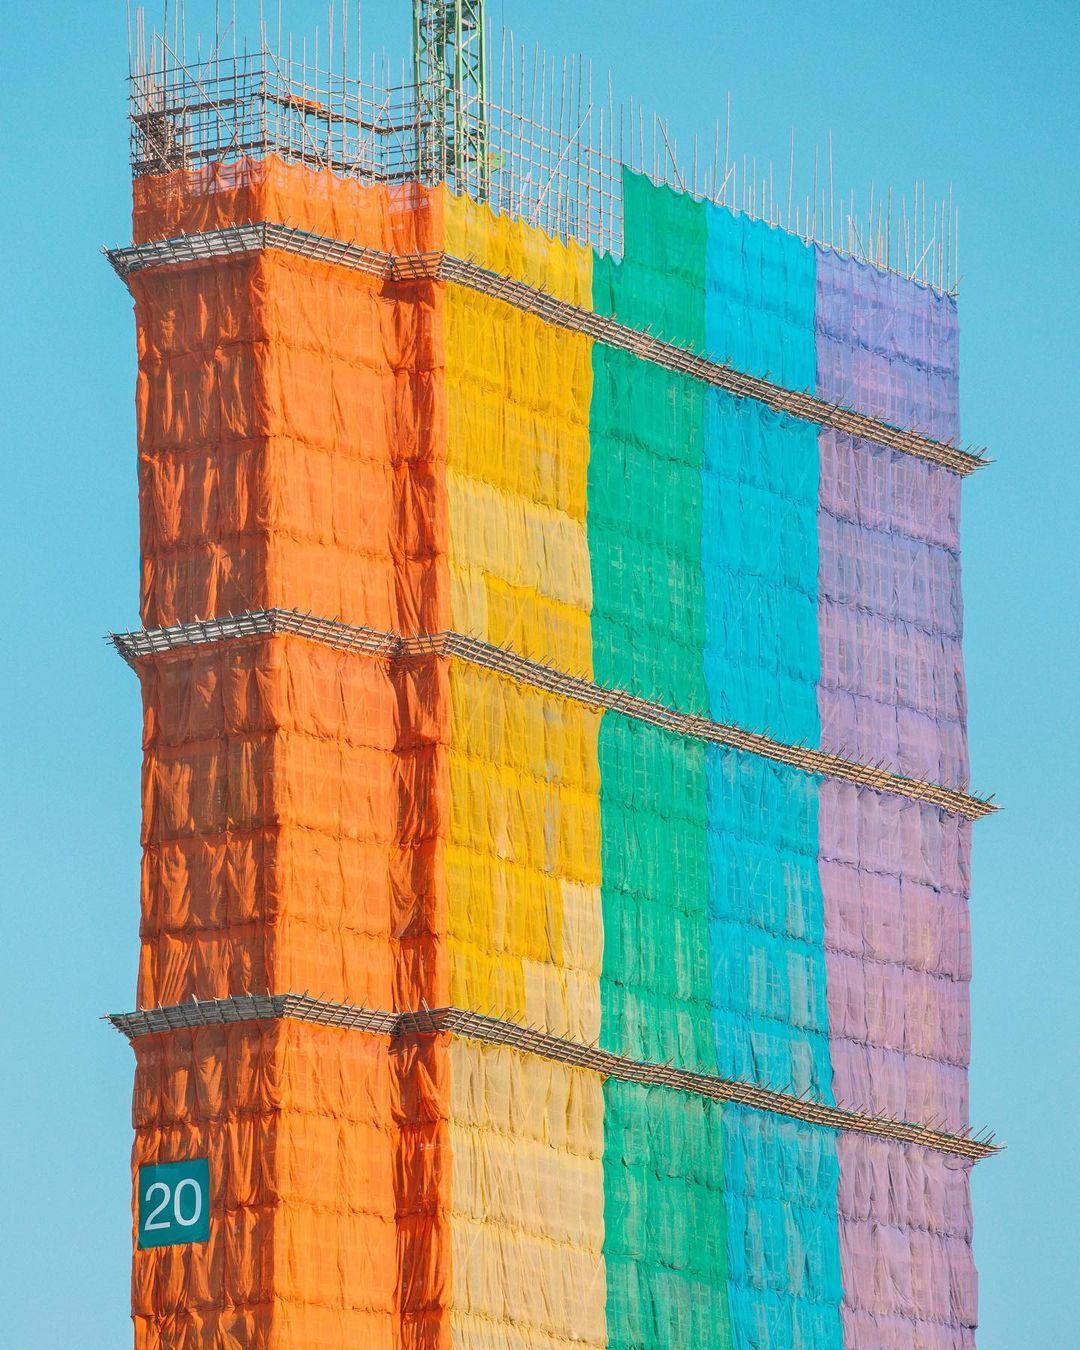 class="content__text"
 Hong Kong construction, but make it rainbow 🌈 

We were taking the bus the other day and noticed this building covered entirely in scaffolding. Being a city famous for using bamboo, I’ve only seen buildings wrapped in green. I marked the location and made sure I came back for some photos! 😬 
 